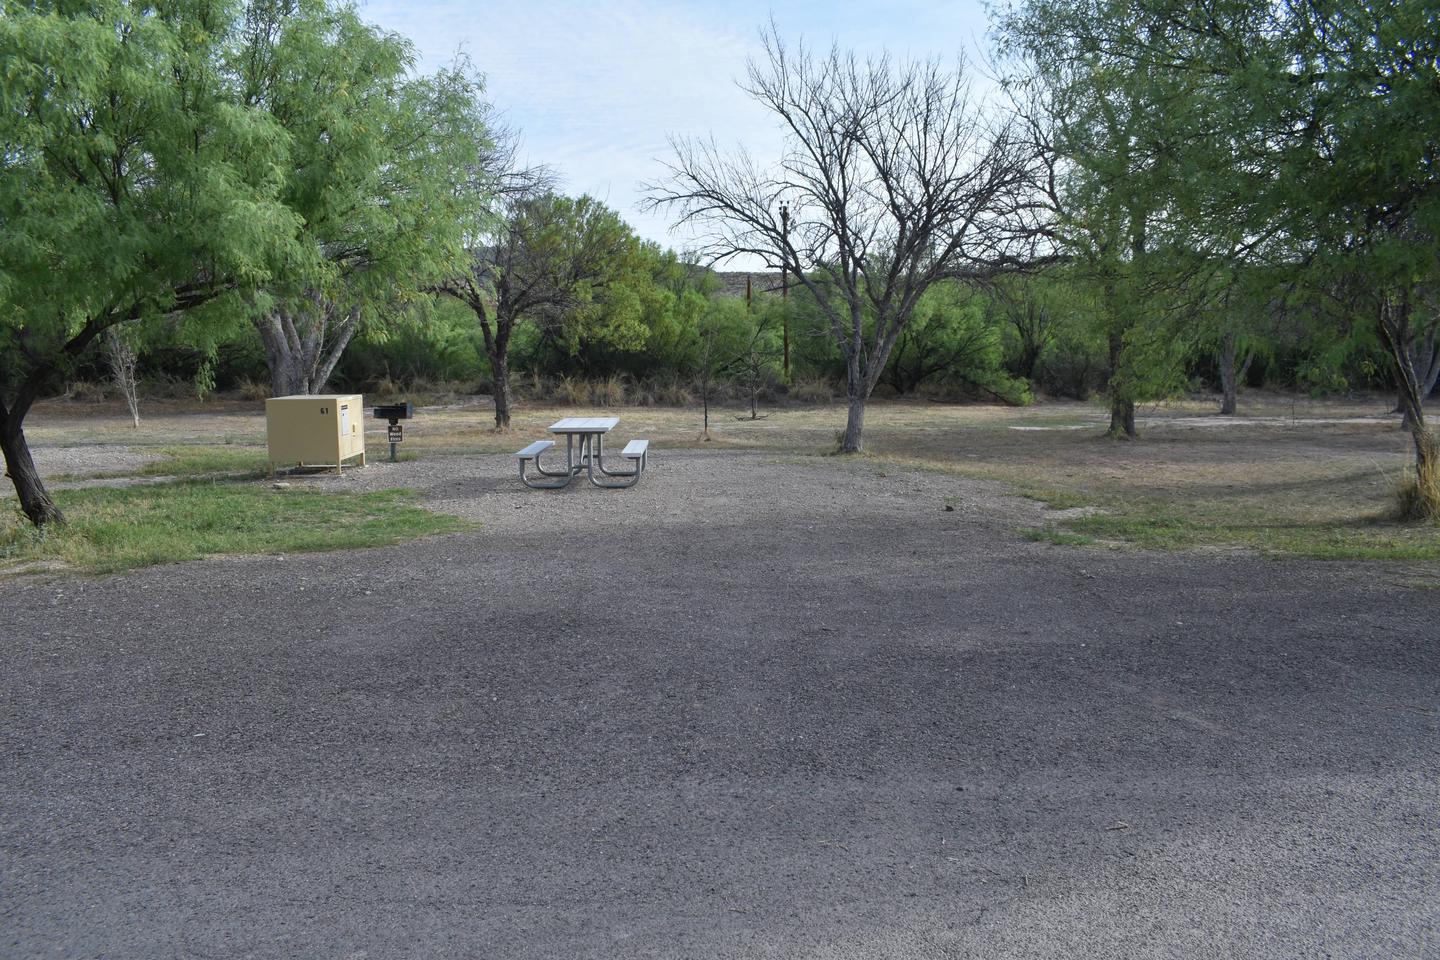 Distant view of parking area and camp site with shade treesParking and camping area for site 61